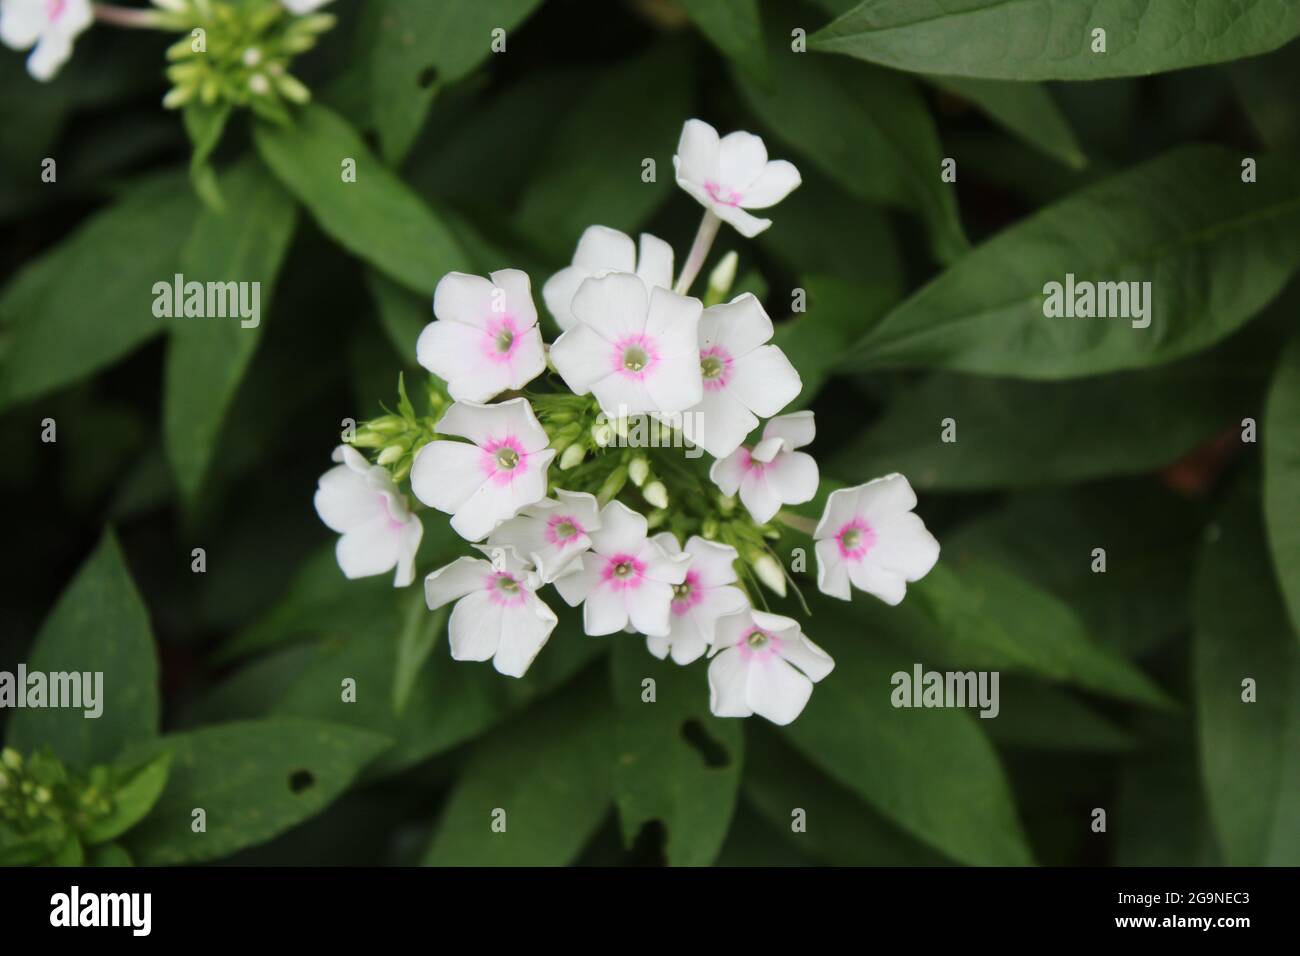 A Cluster of White Phlox Fowers with Pink Centers Stock Photo